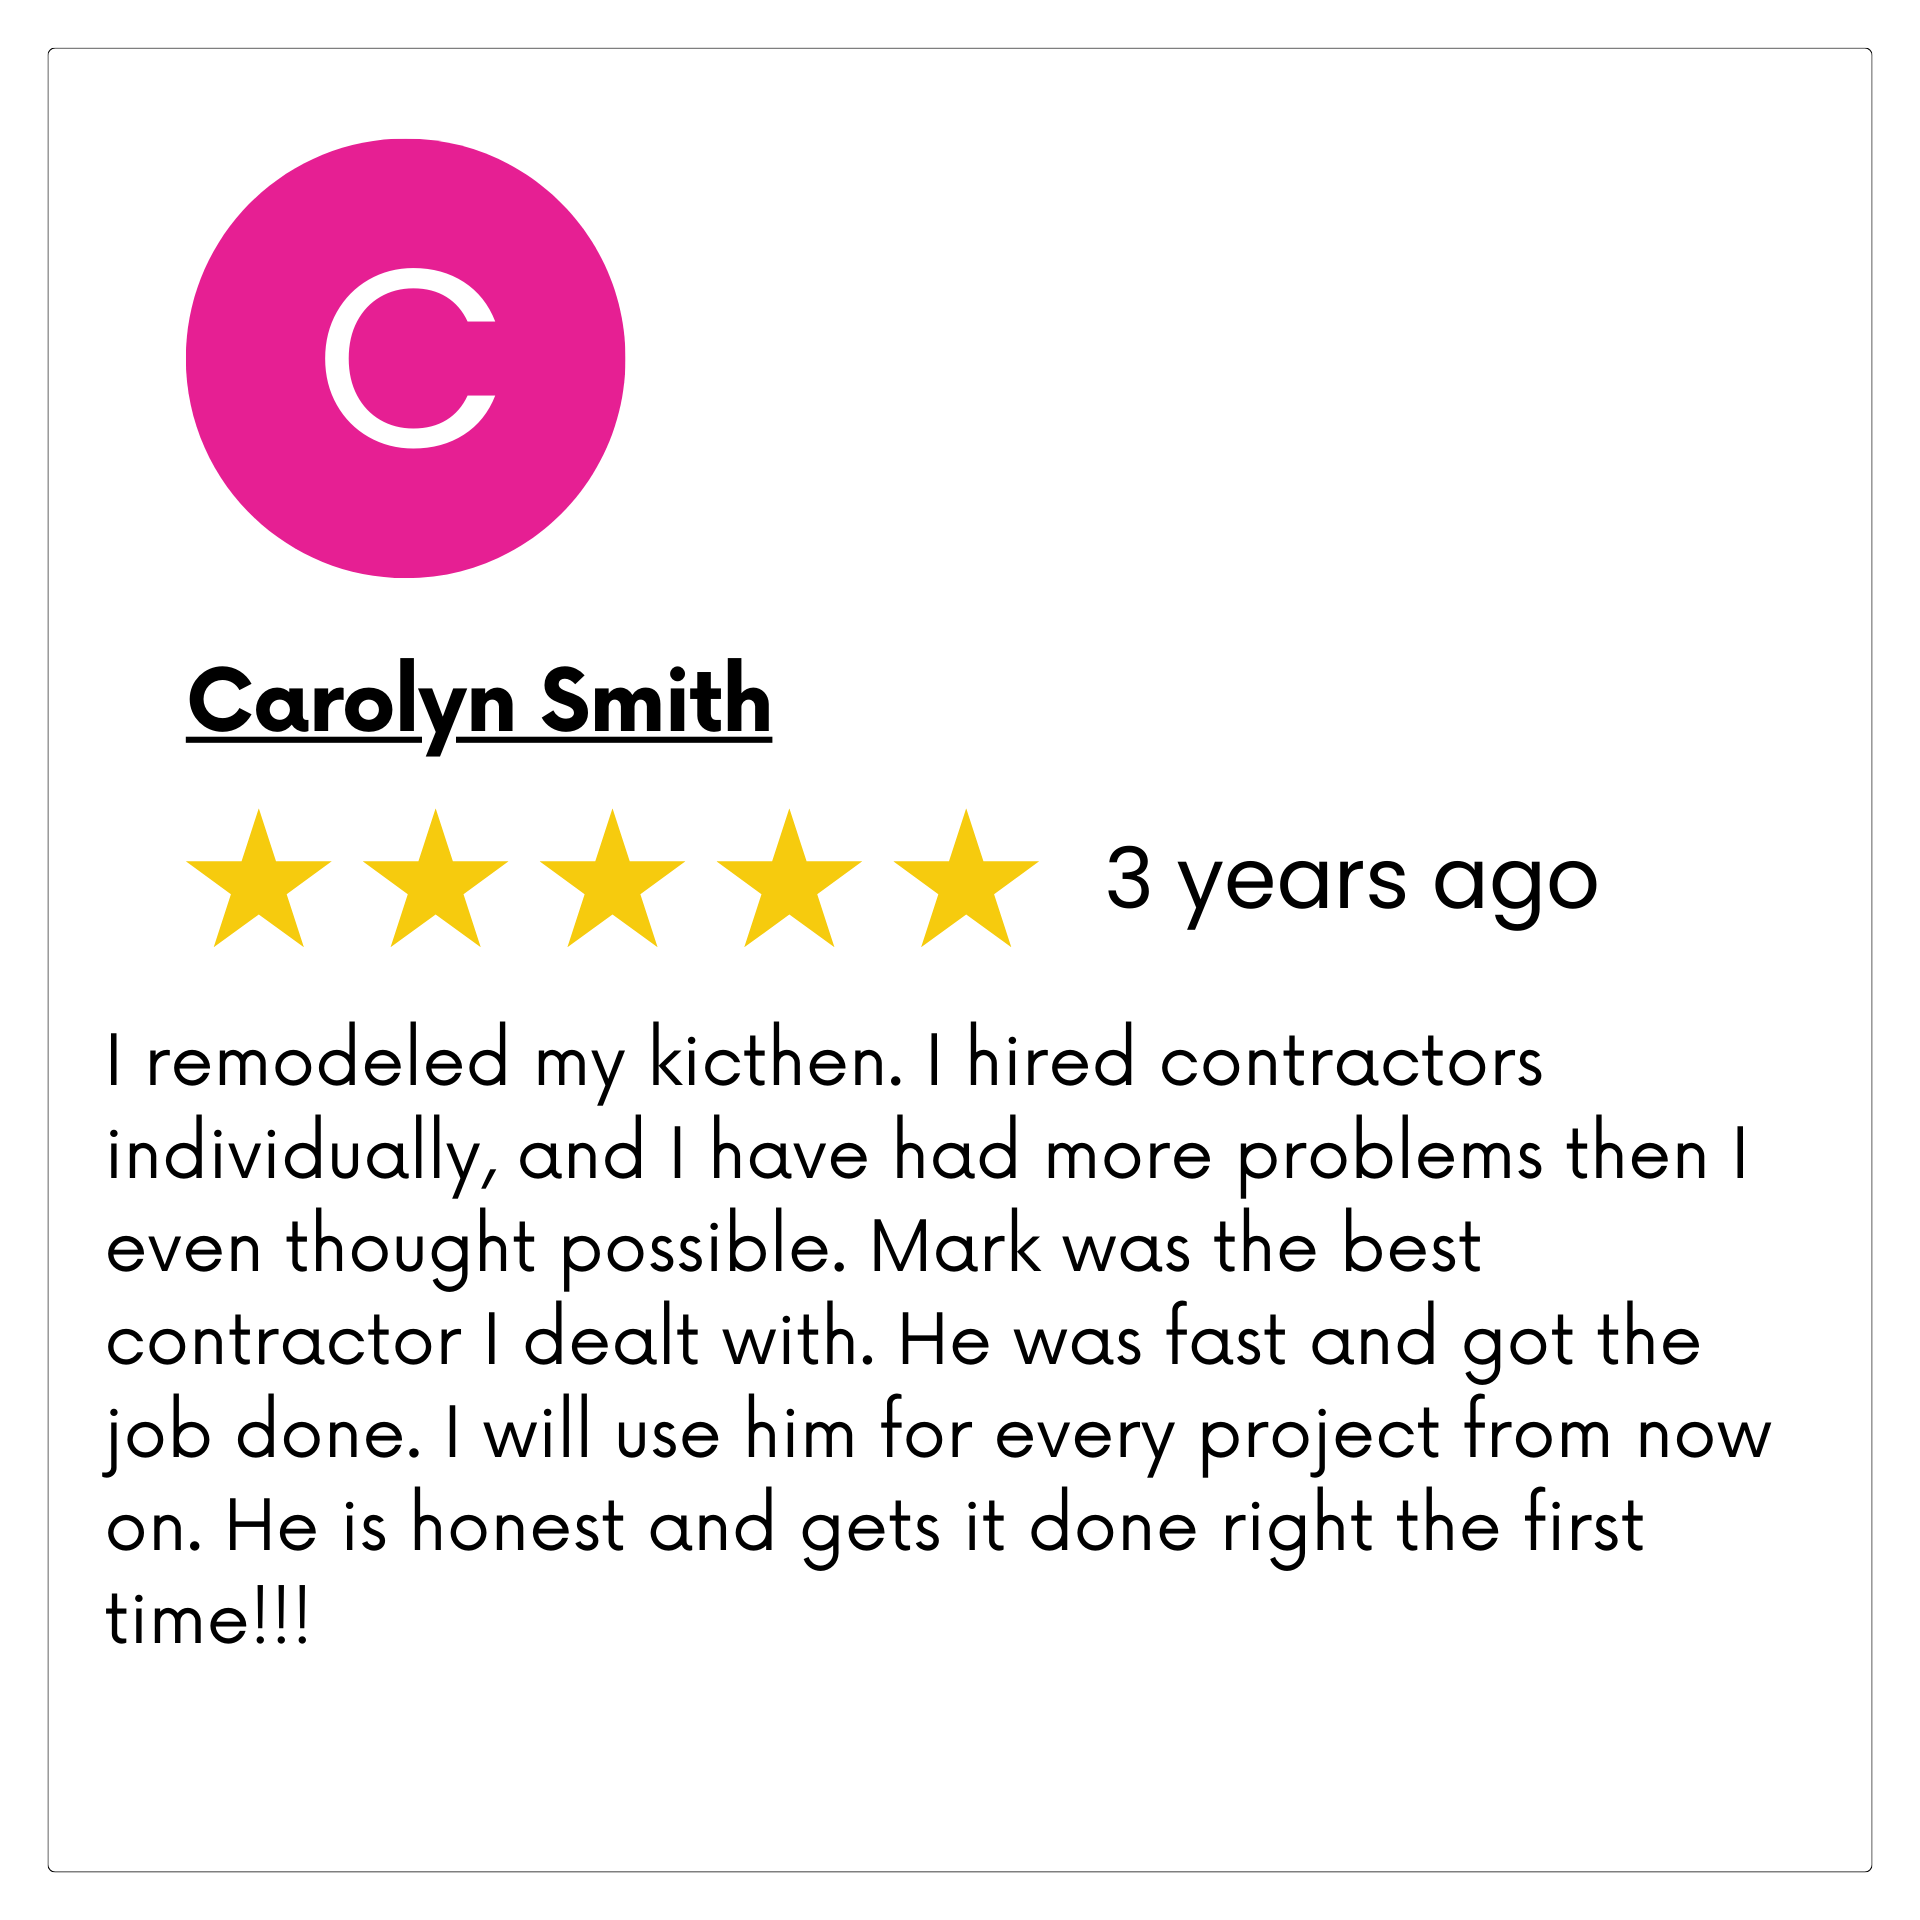 A review from carolyn smith shows that she remodeled her kitchen.